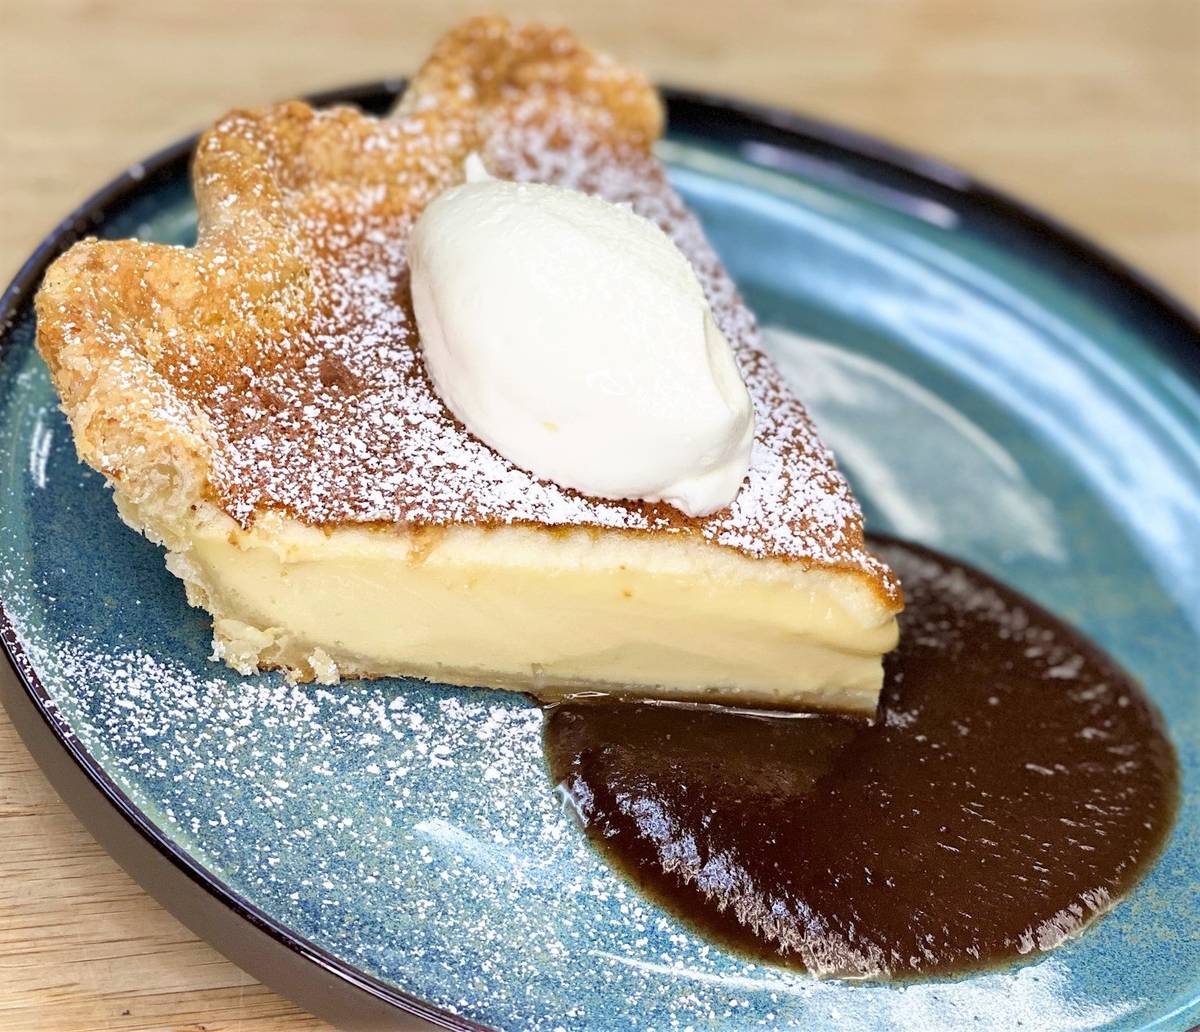 The Pop 'n Pies egg custard pie is available at Sparrow & Wolf. (Sparrow & Wolf)